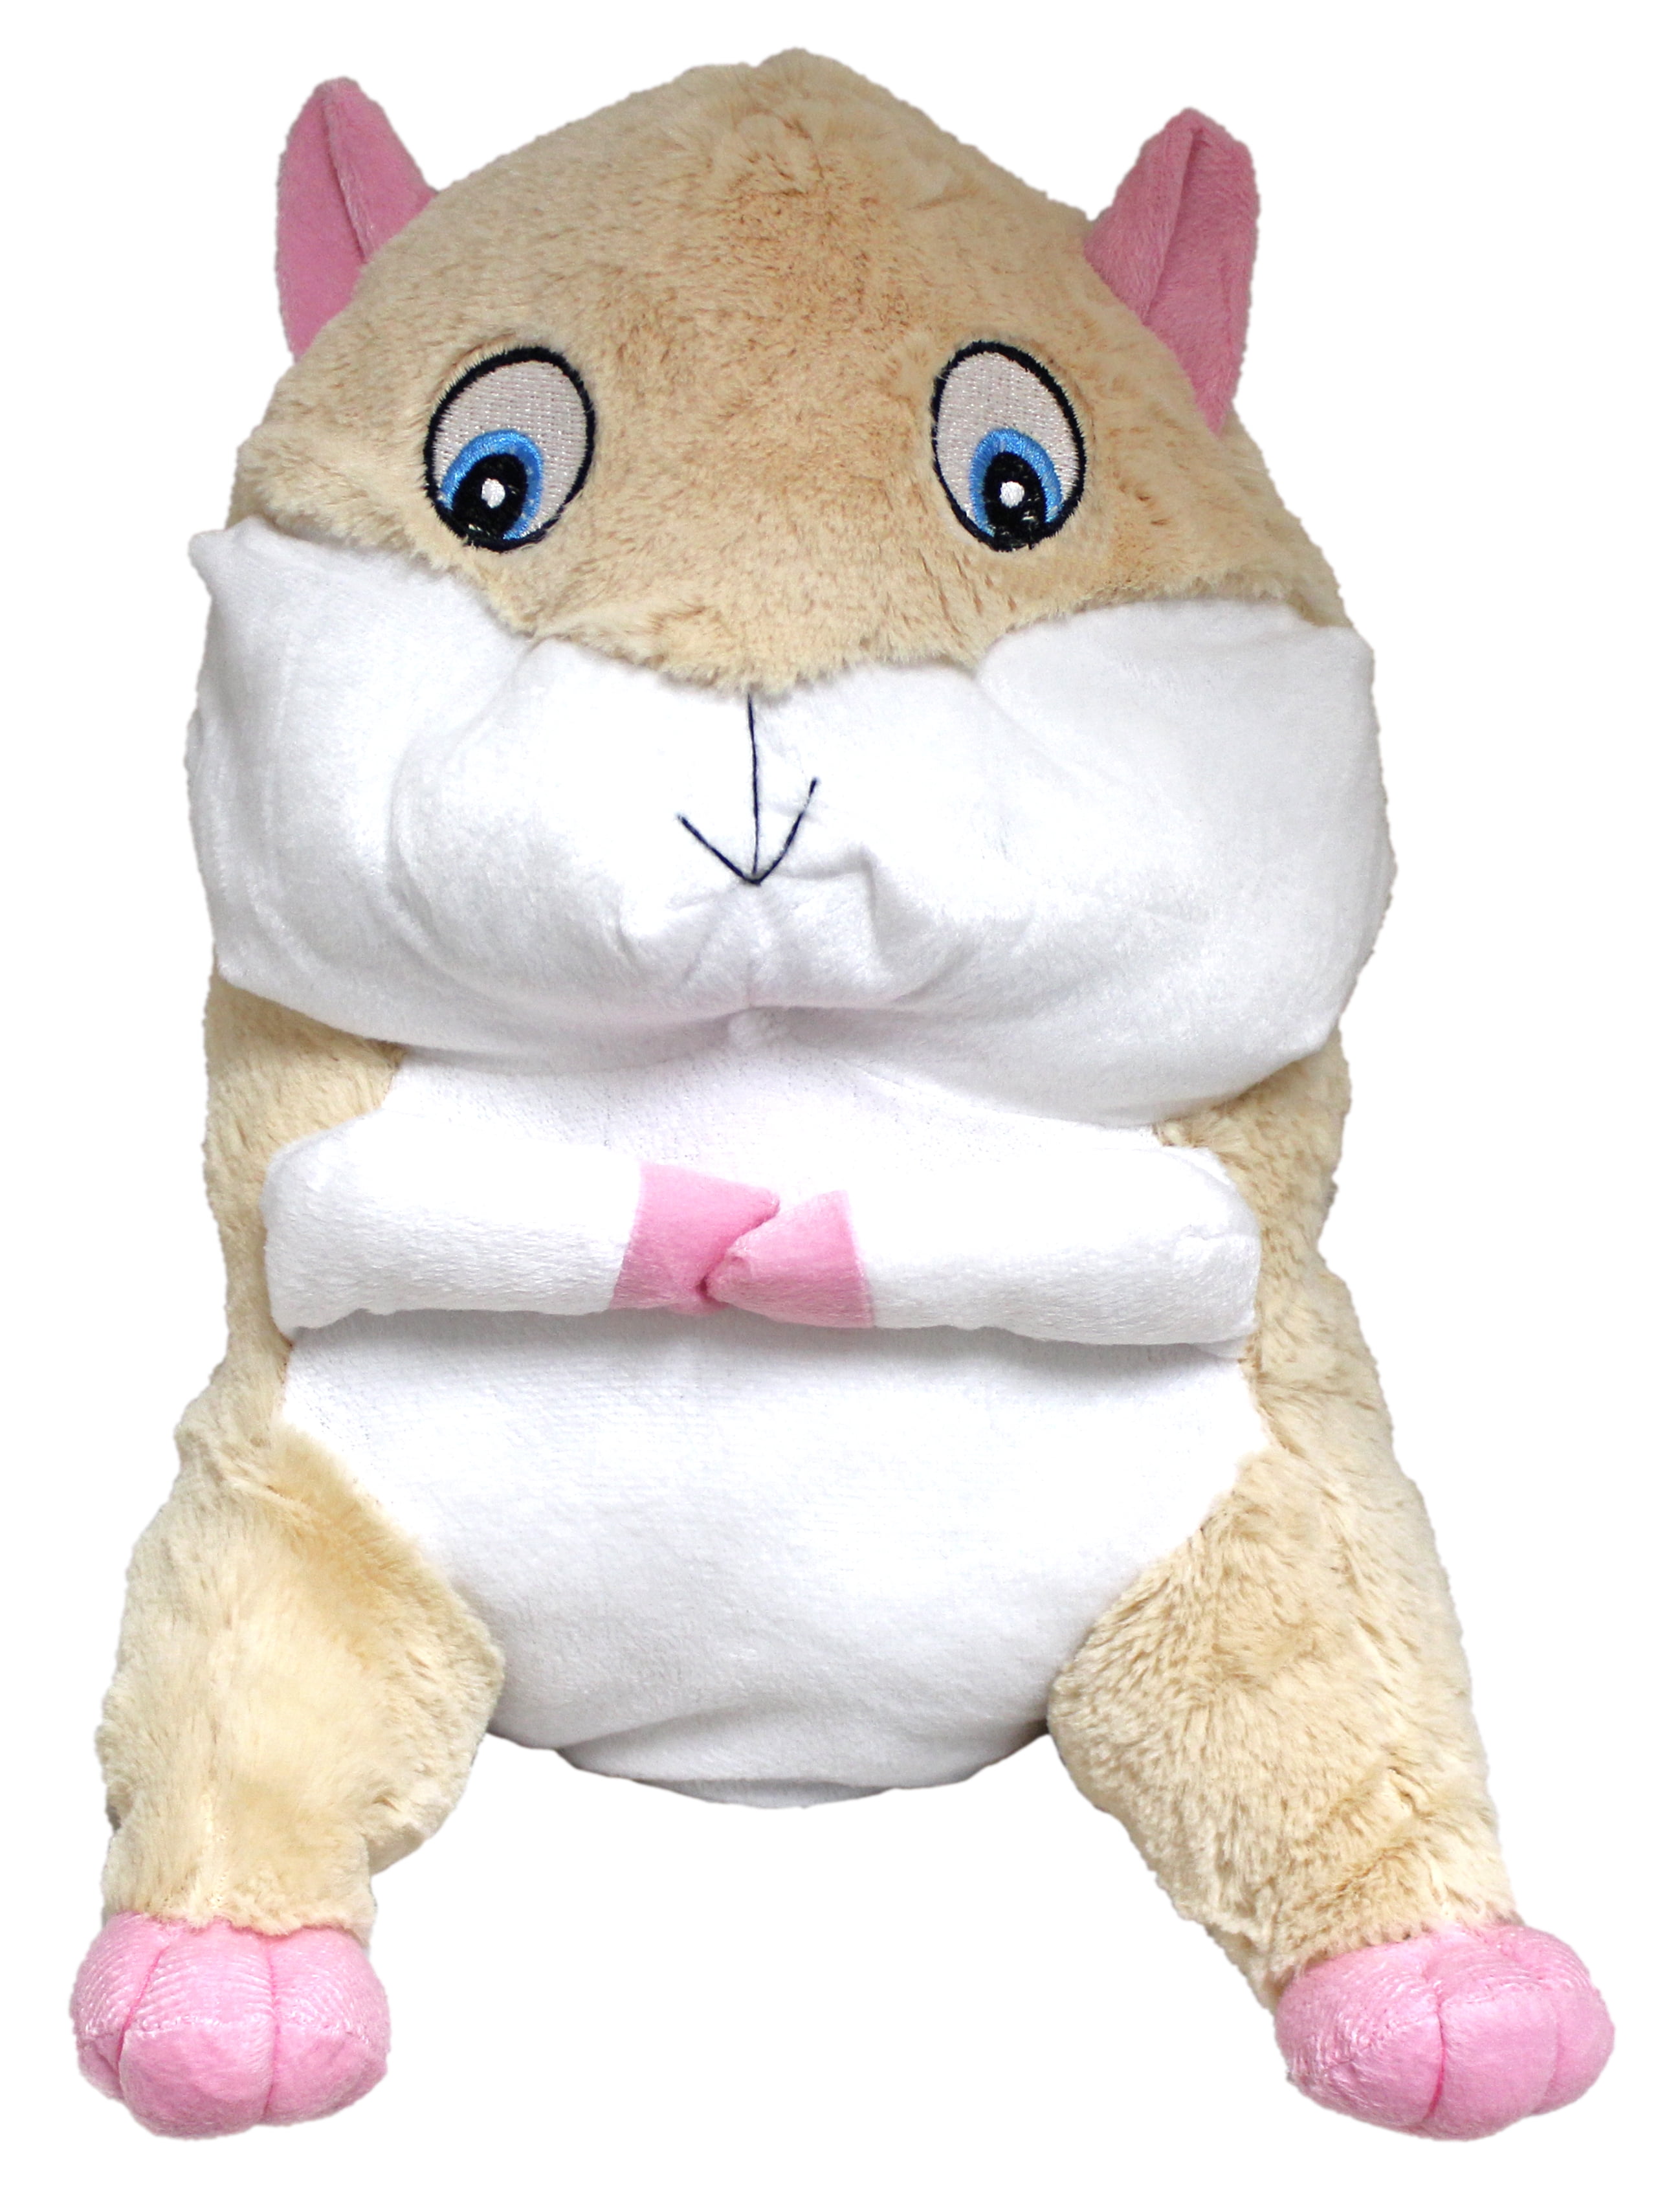 Squishmallow  8" Gerbil  Plush Soft Pillows NEW With Tags Free Shipping